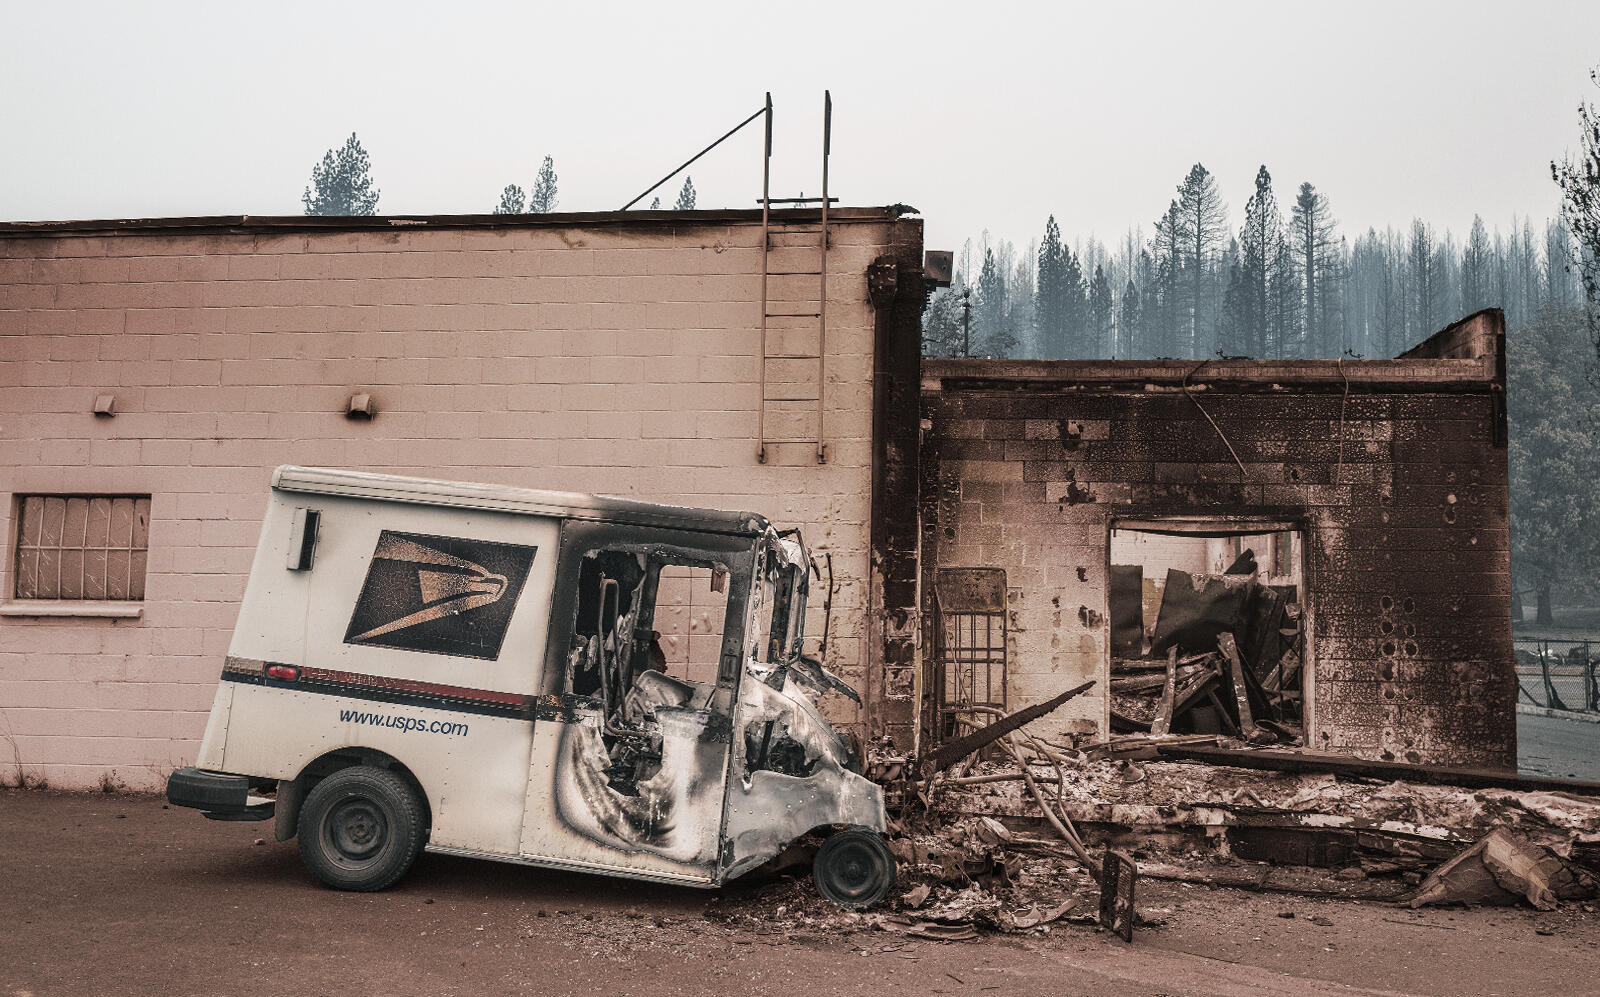 Greenville, California after the fire (Getty)